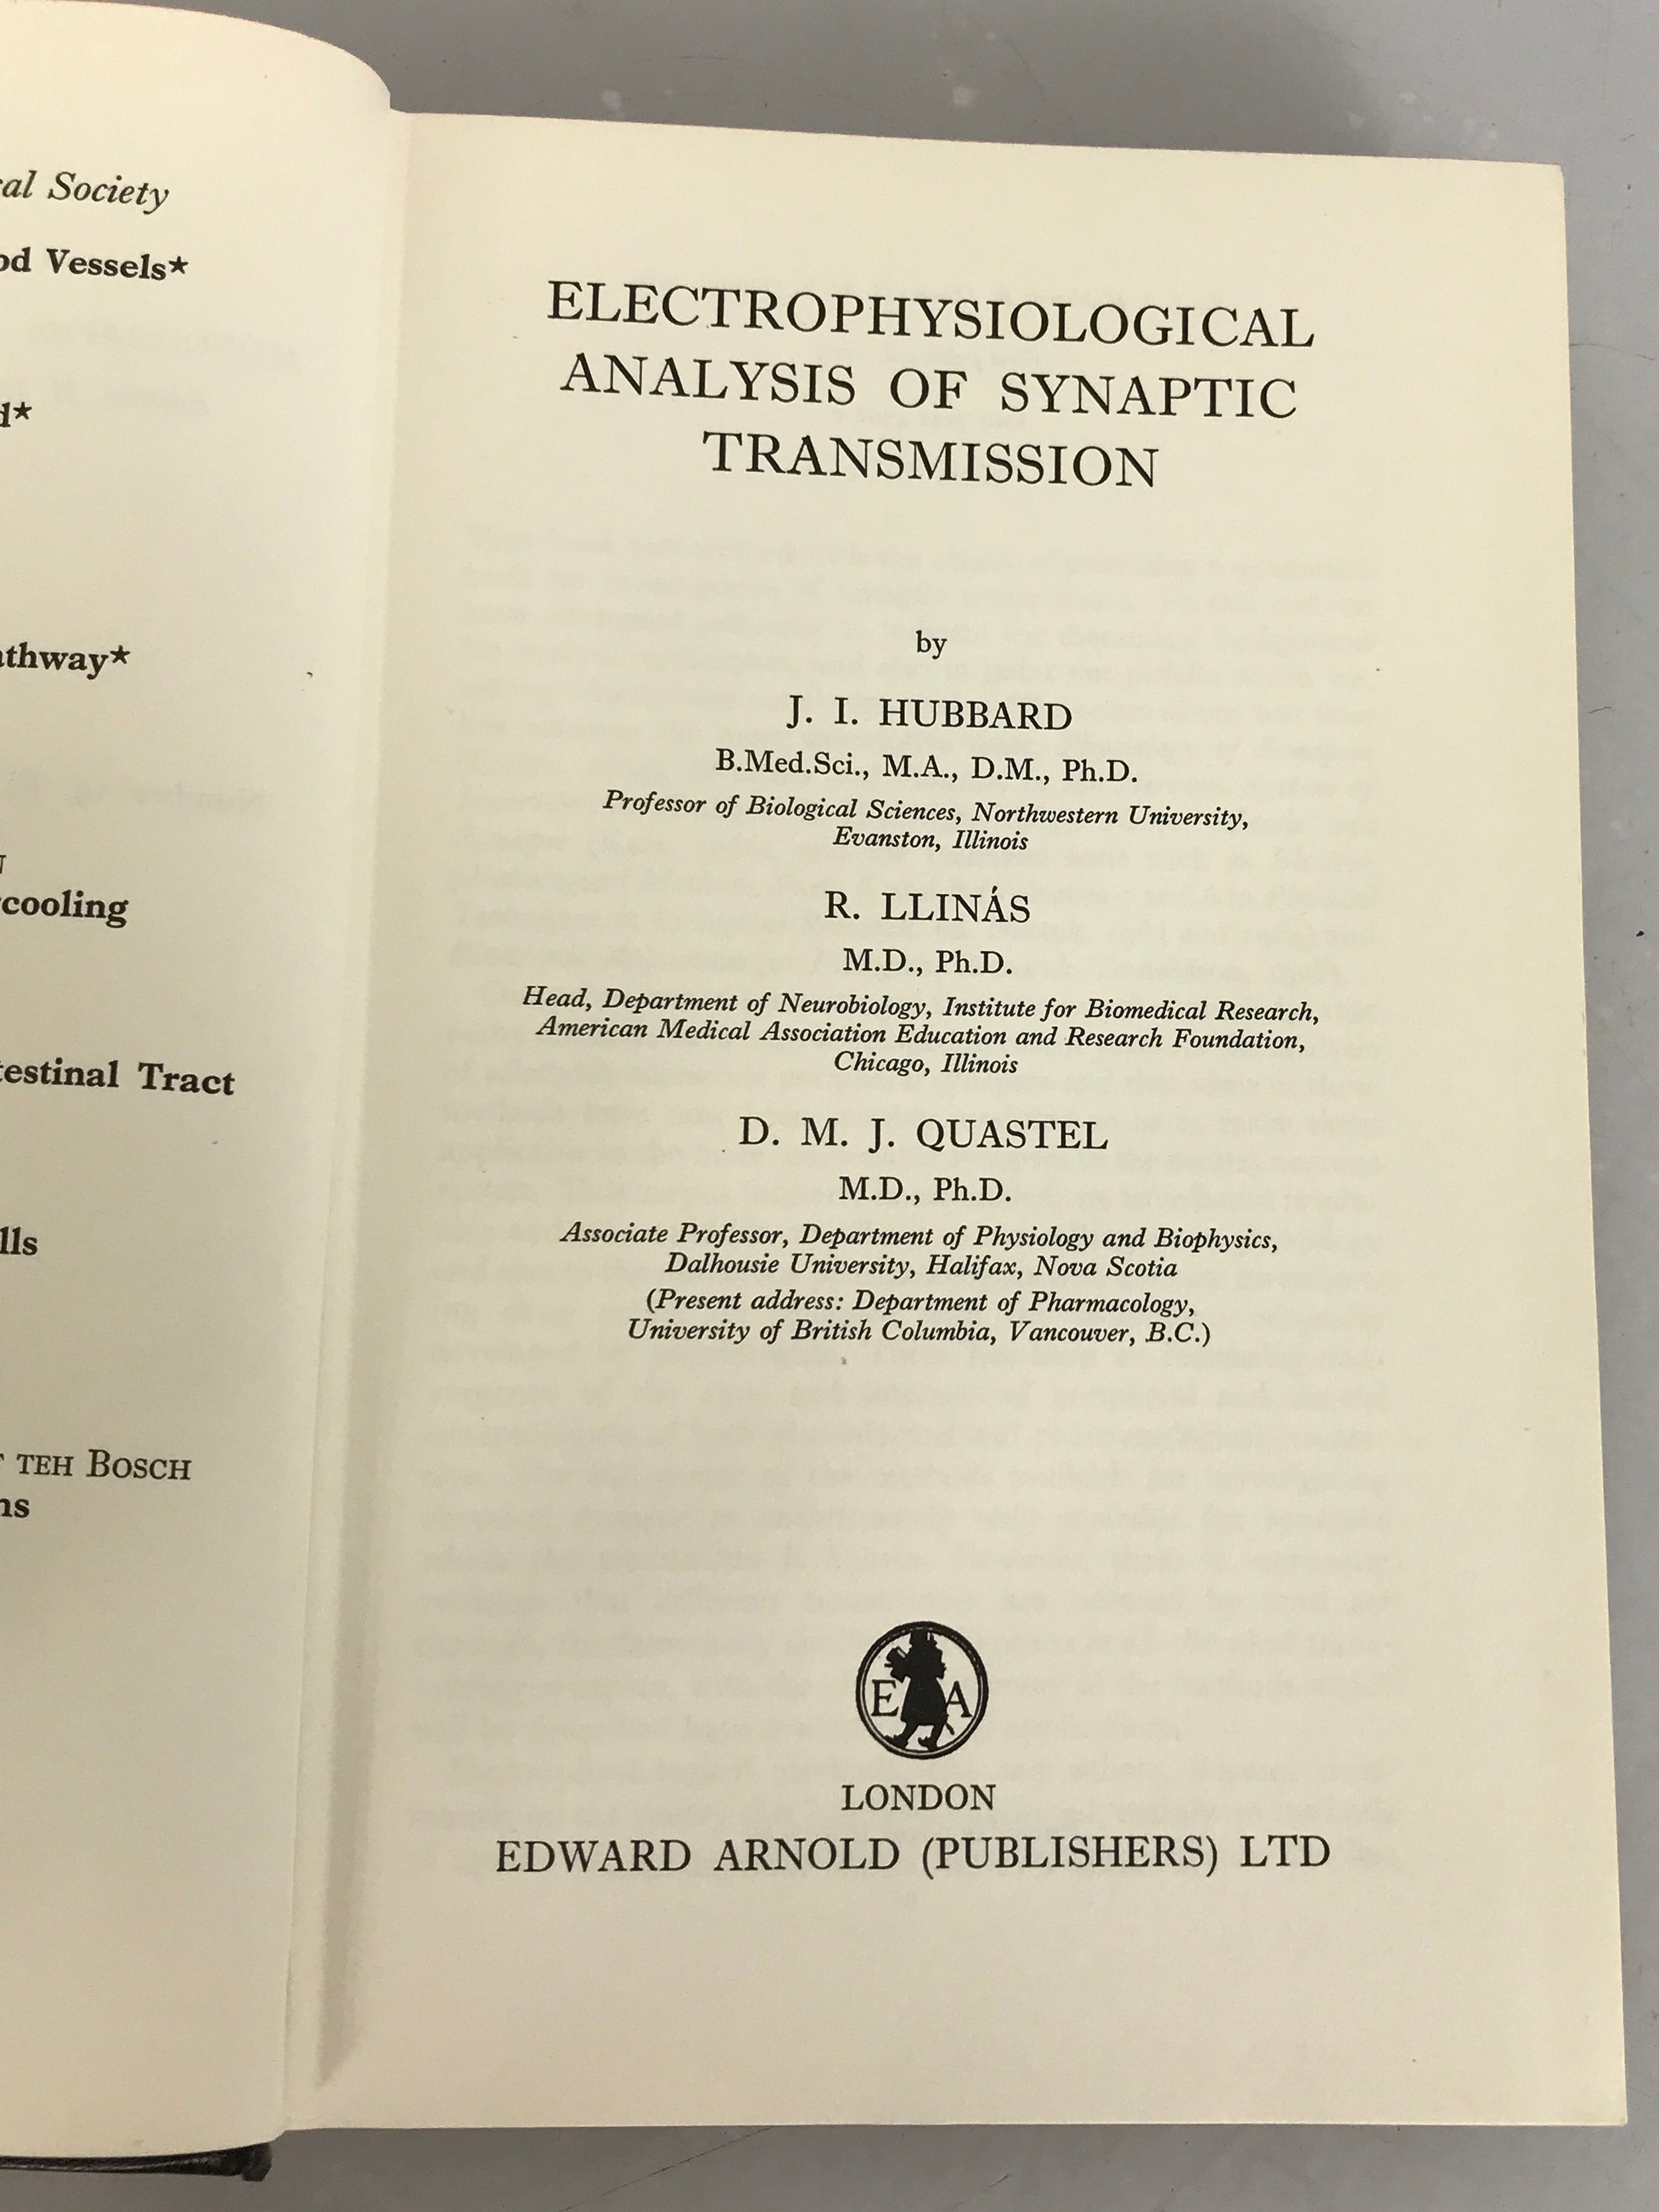 Lot of 2 Physiology of Synapses Books: Electrophysiological Analysis of Synaptic Transmission (1969) and The Physiology of Synapses (1964) HC DJ